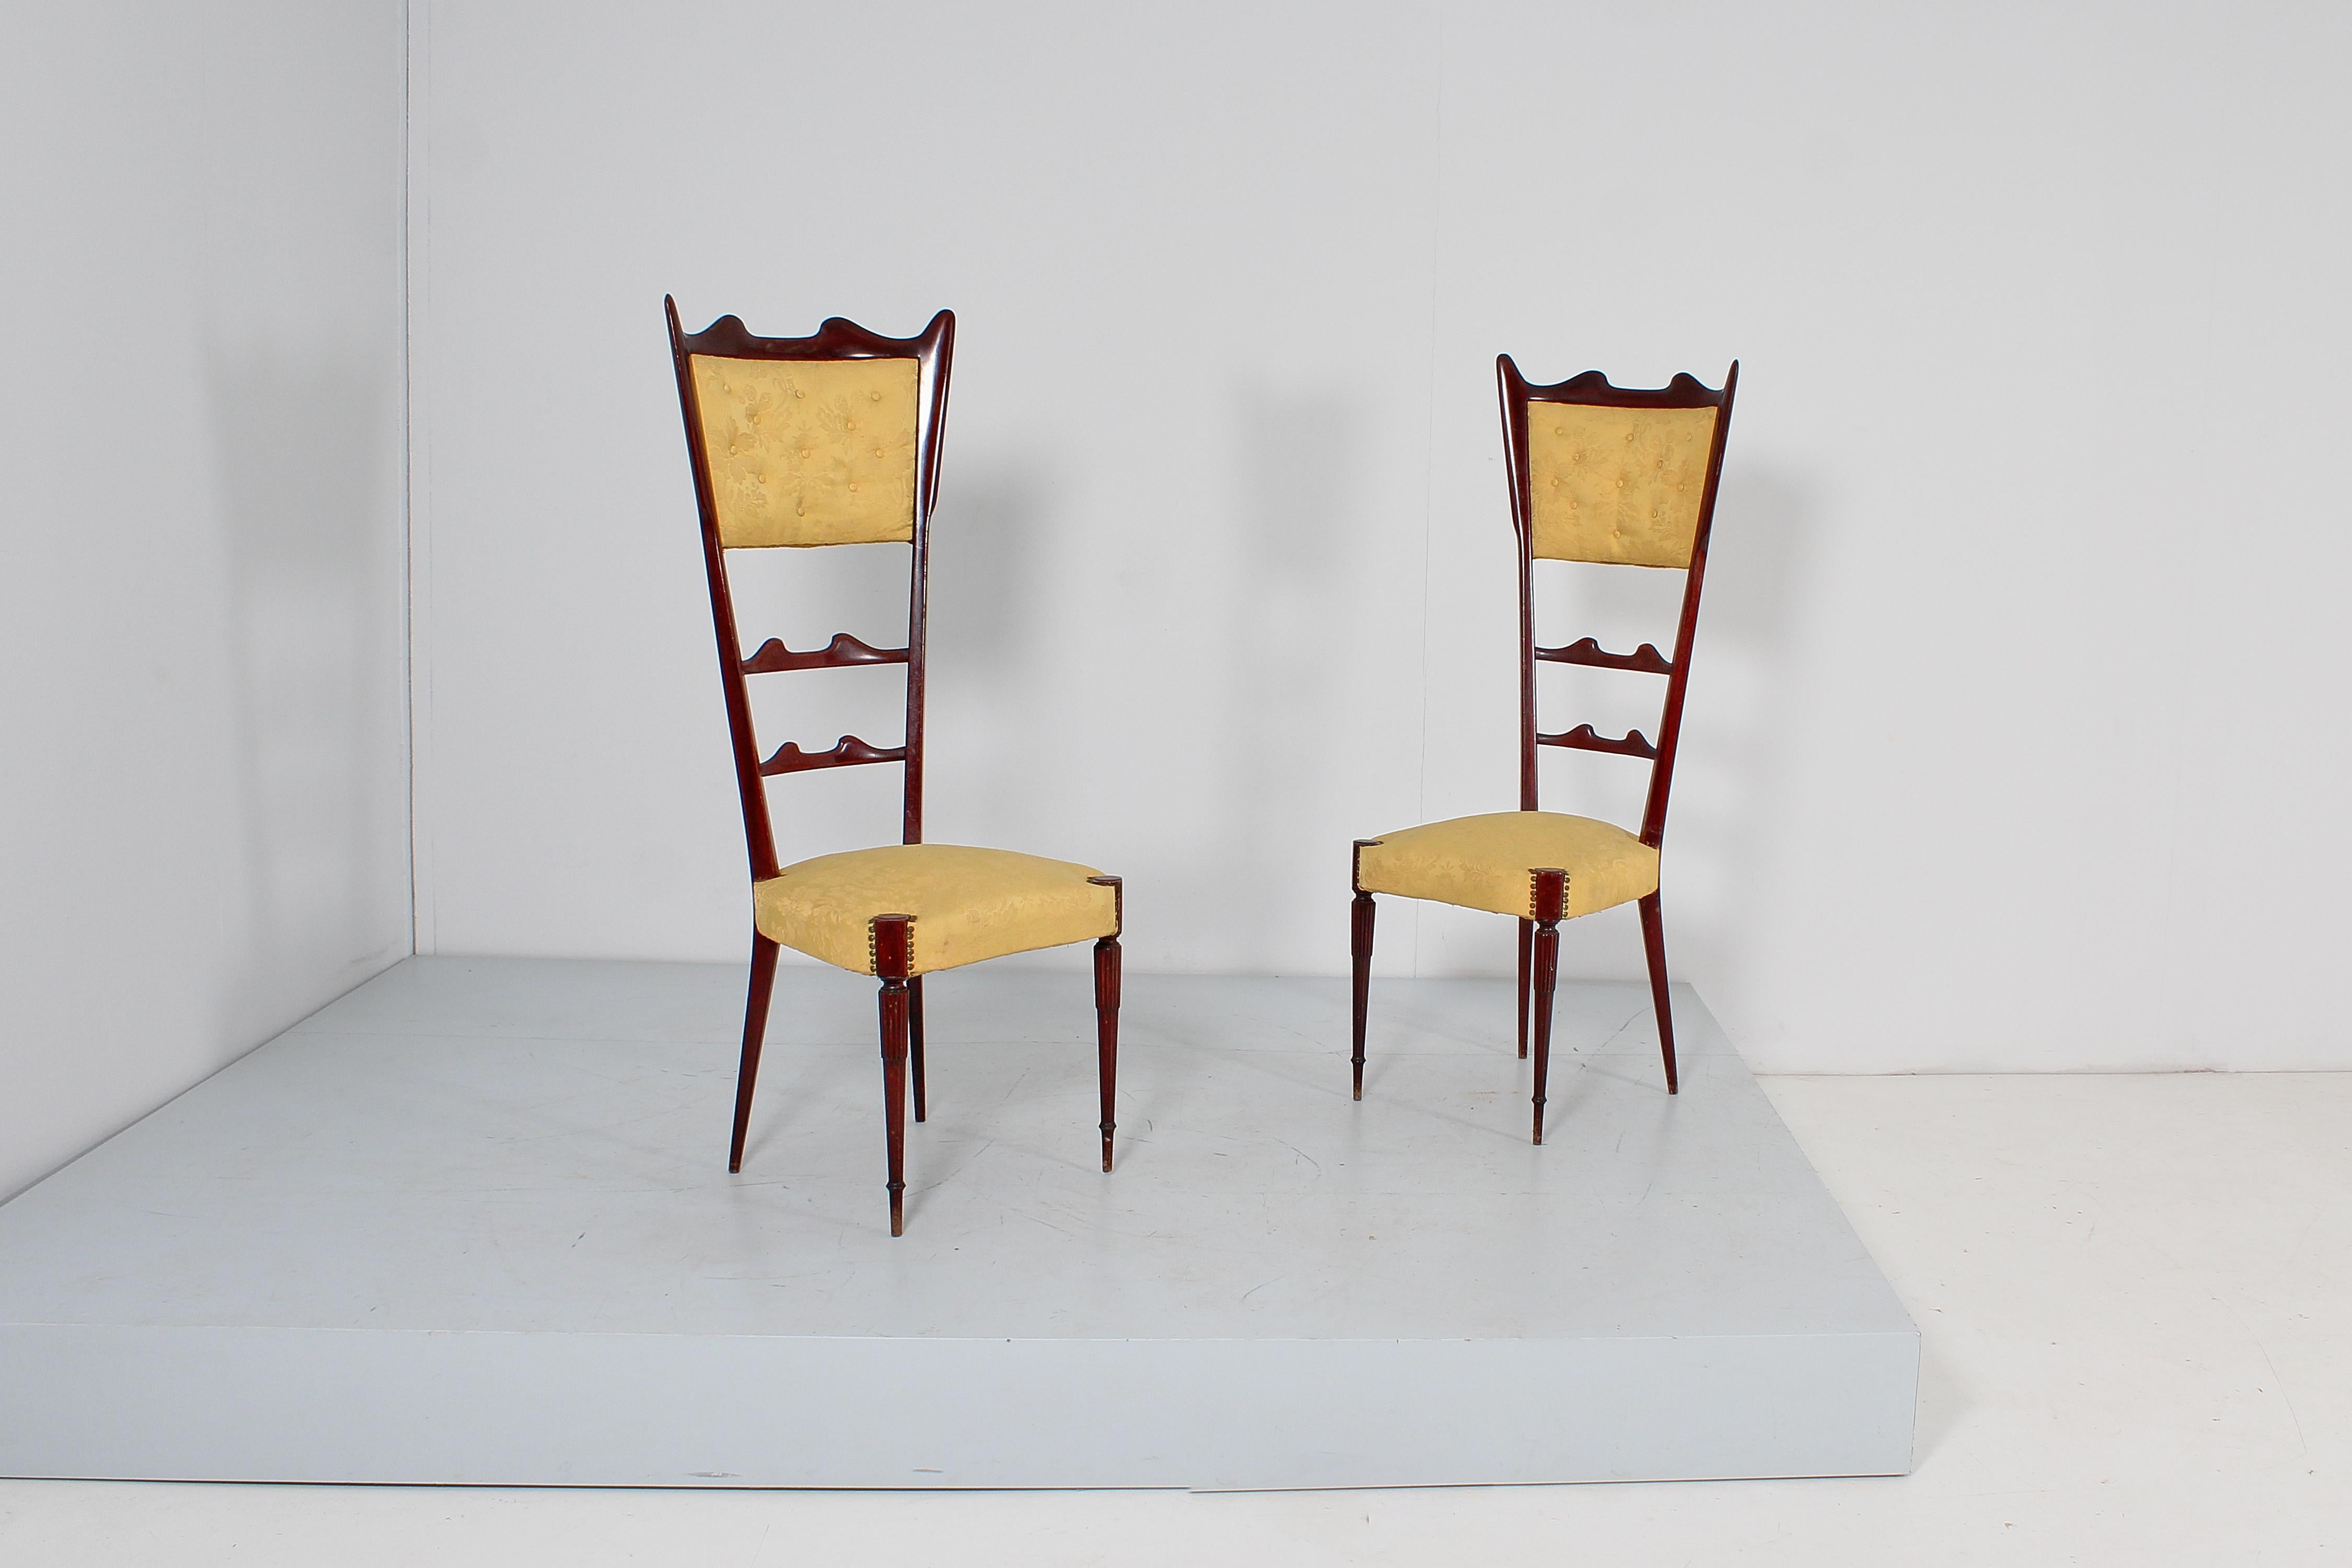 Italian Midcentury Giò Ponti Style High Espalier Chairs Set of 2, 1950s, Italy For Sale